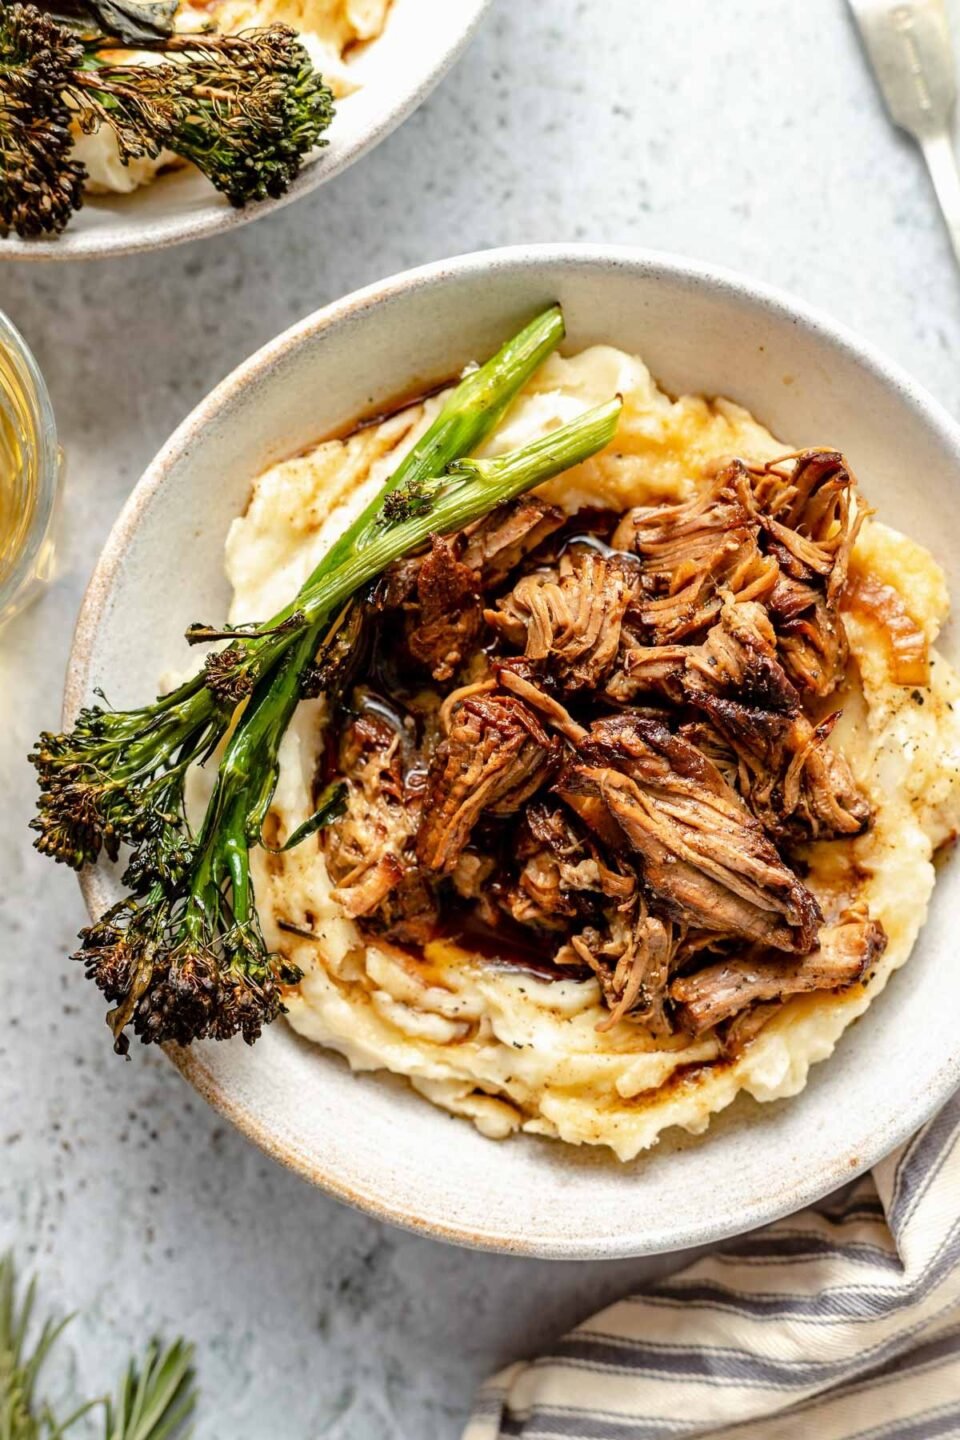 Two servings of slow cooked lamb are served over mashed potatoes in white ceramic bowls with broccolini and extra braising liquid over top. The bowls sit atop a gray textured surface with loose sprigs of rosemary, a silver fork, a striped linen napkin and a glass of white wine surrounds the bowls.